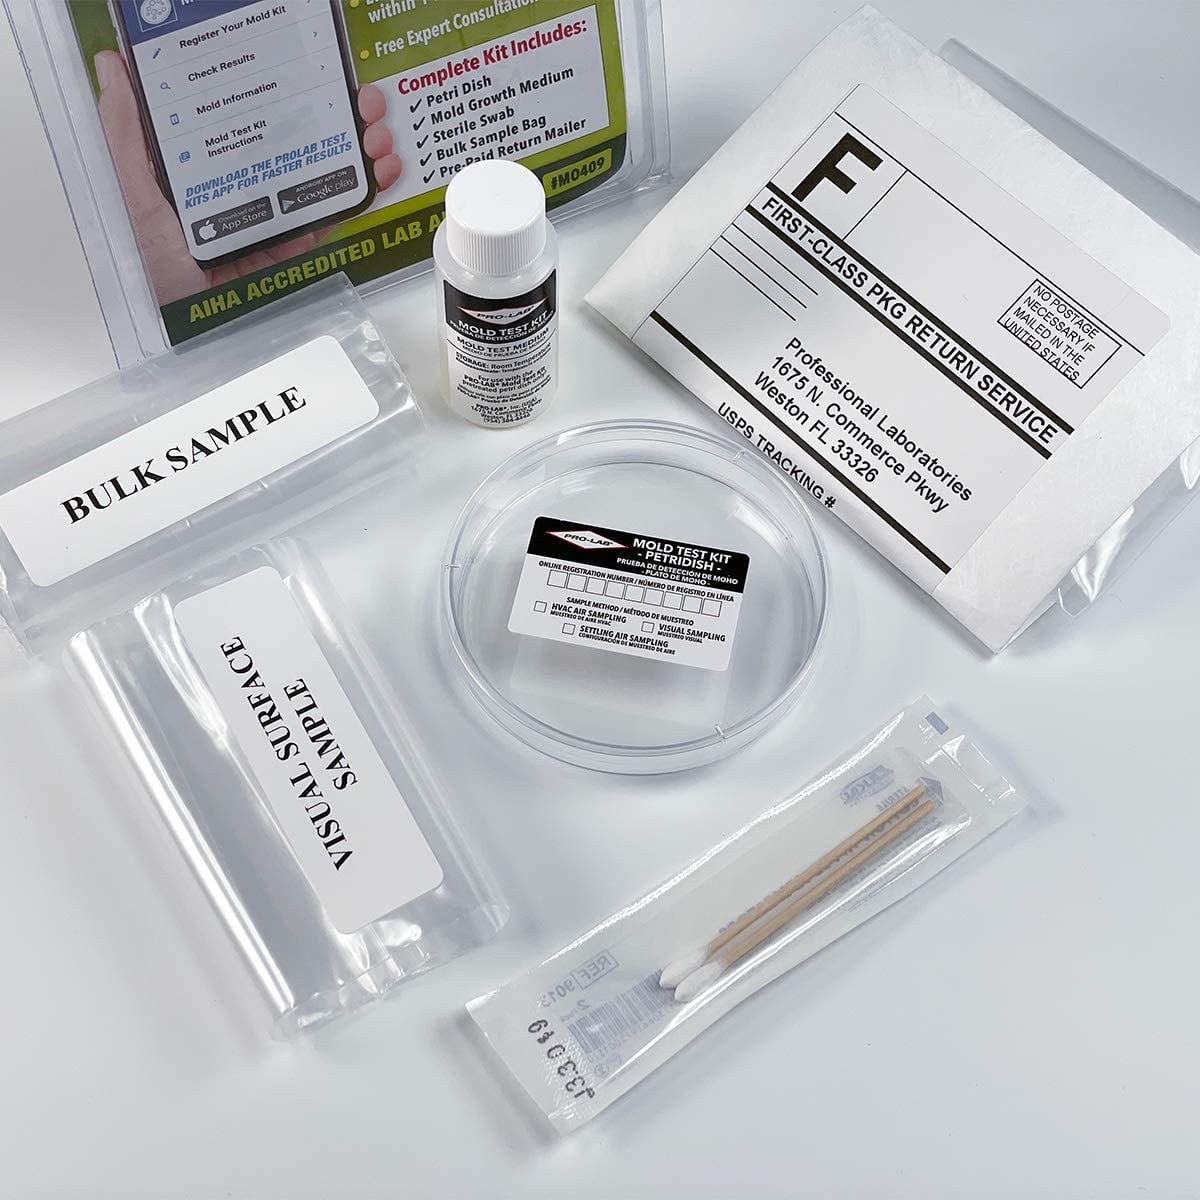 Mold Test Kit FAQ and Resources